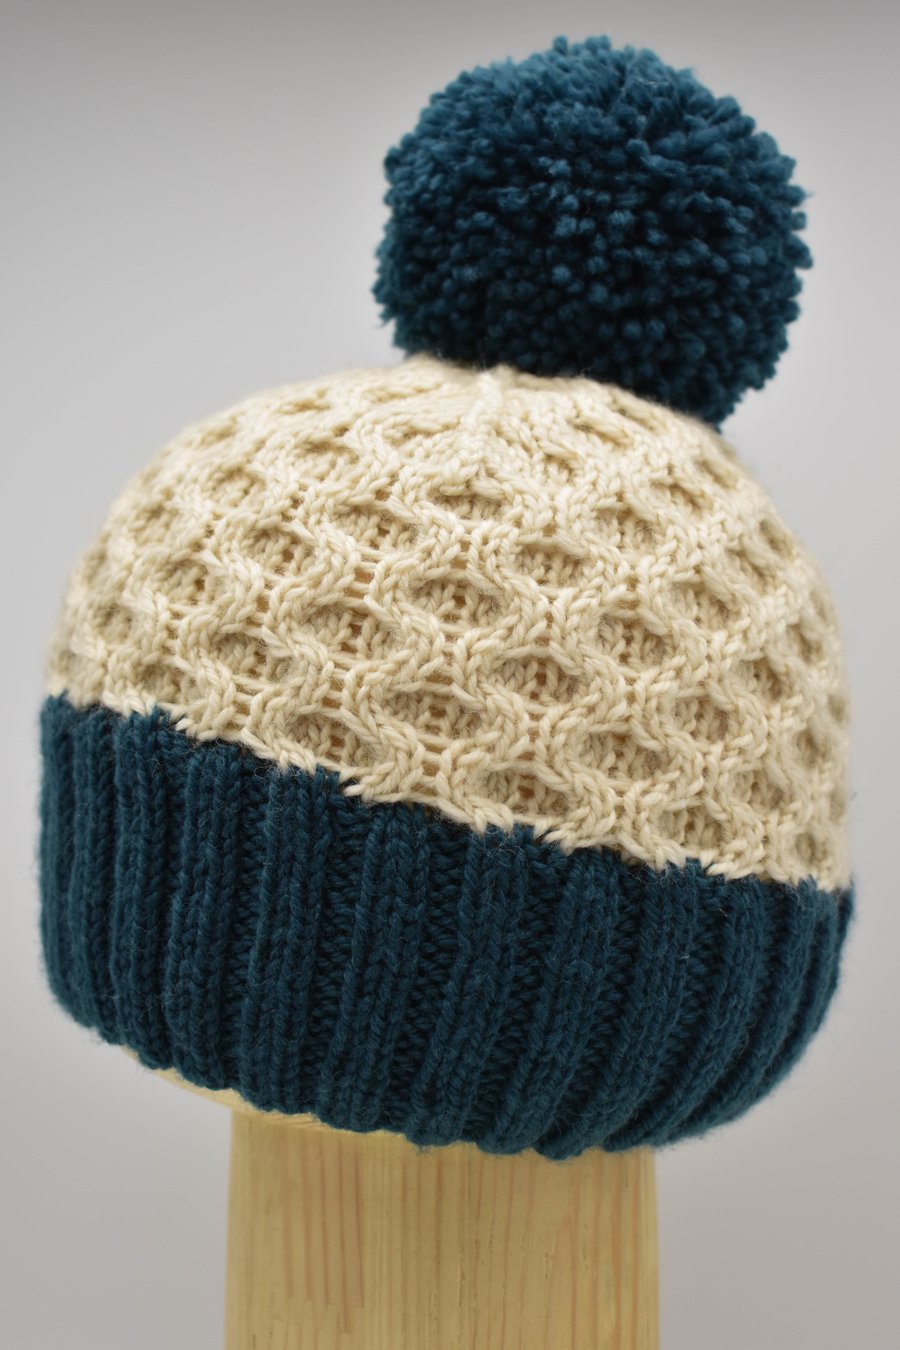 Hand Knitted "Honeycomb" Pom-pom hat in teal and cream